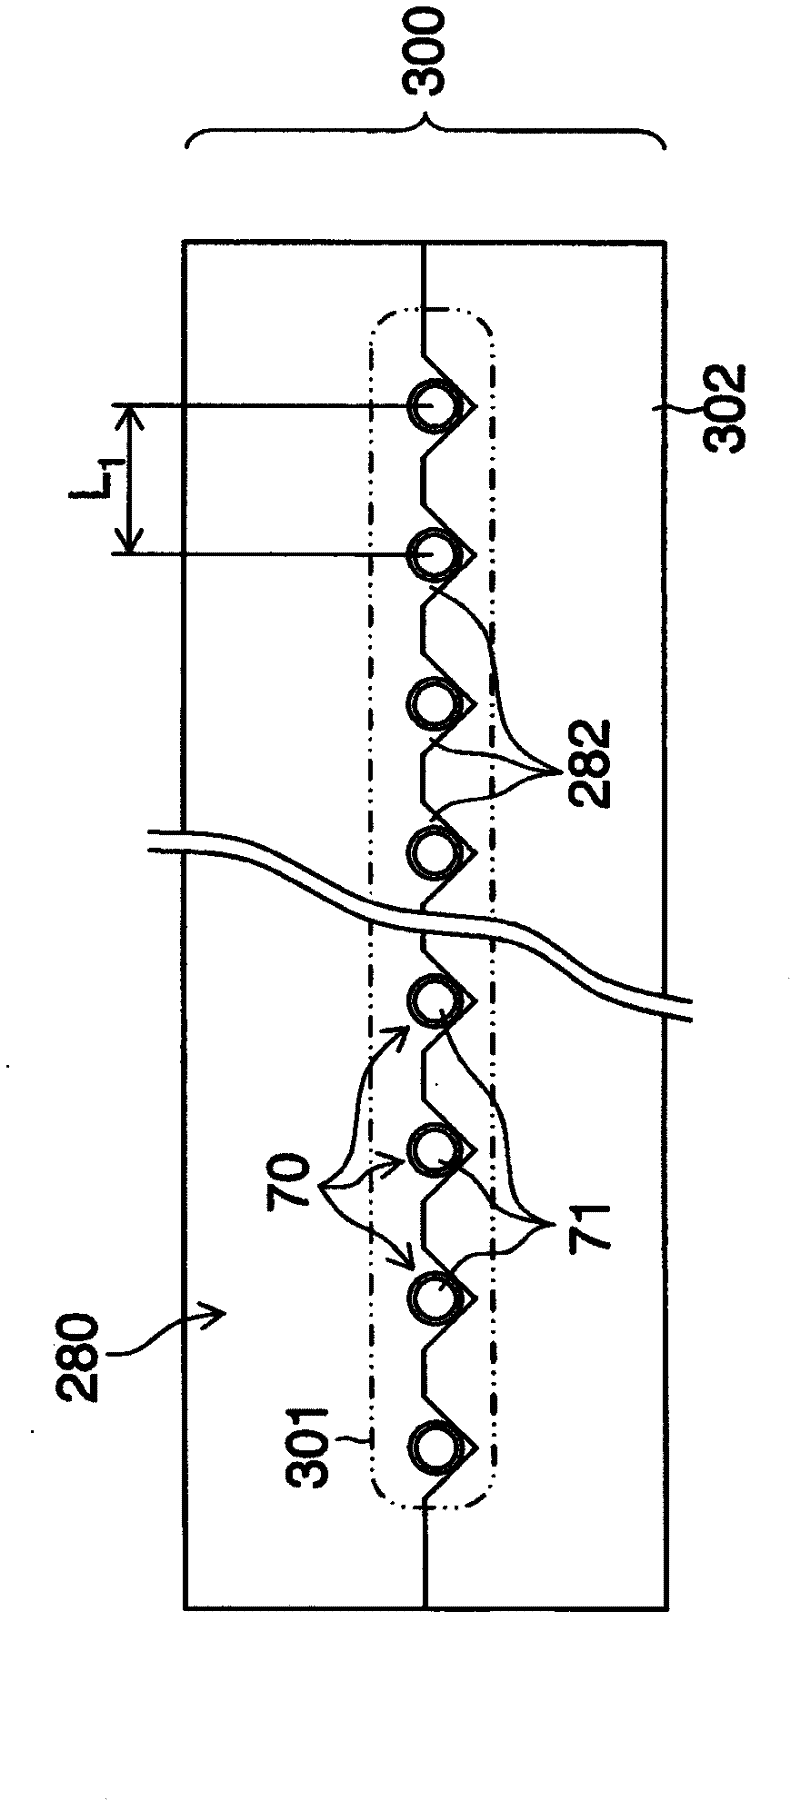 Multi-beam exposure scanning method and apparatus, and method for manufacturing printing plate